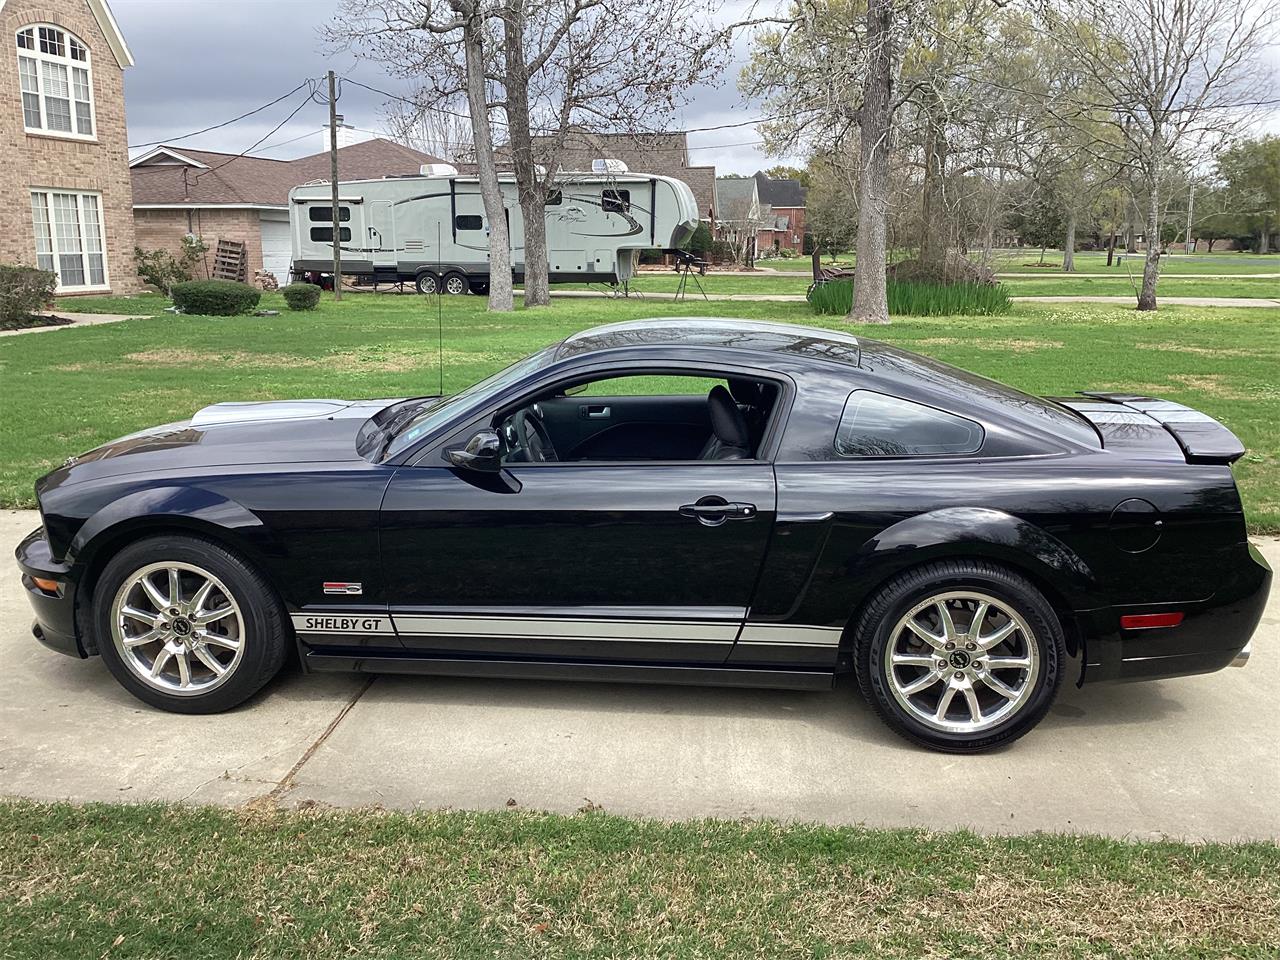 2007 Ford Mustang Shelby GT in BAYTOWN, Texas